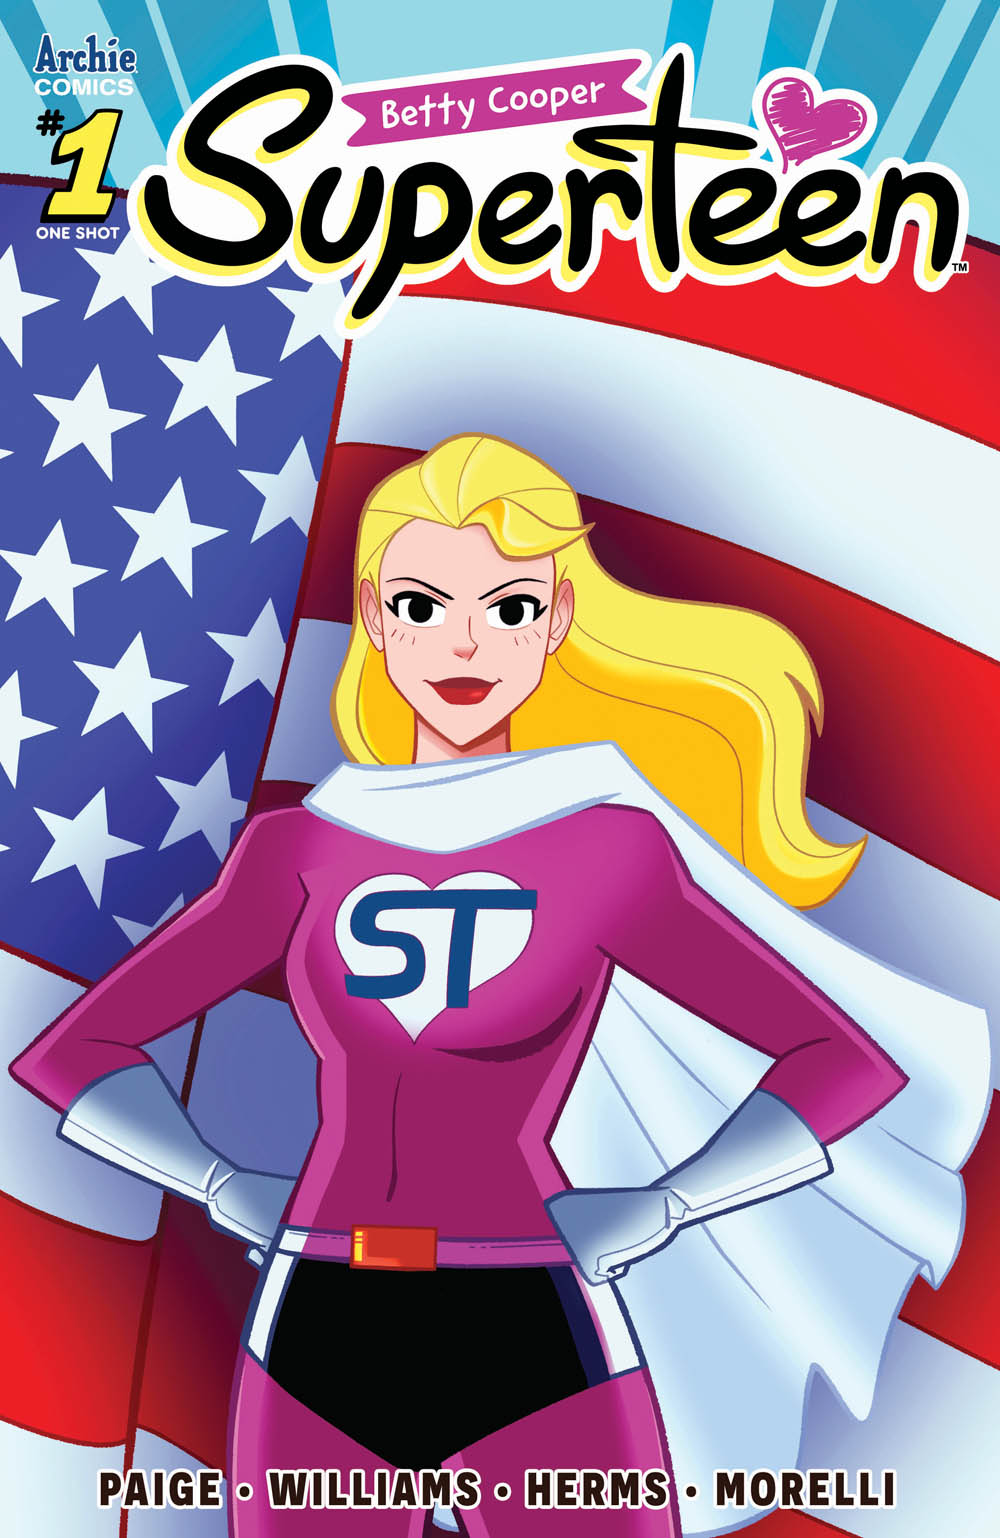 A classic Archie superhero returns to duty in BETTY COOPER: SUPERTEEN #1 by  Danielle Paige and Brittney Williams! - Archie Comics